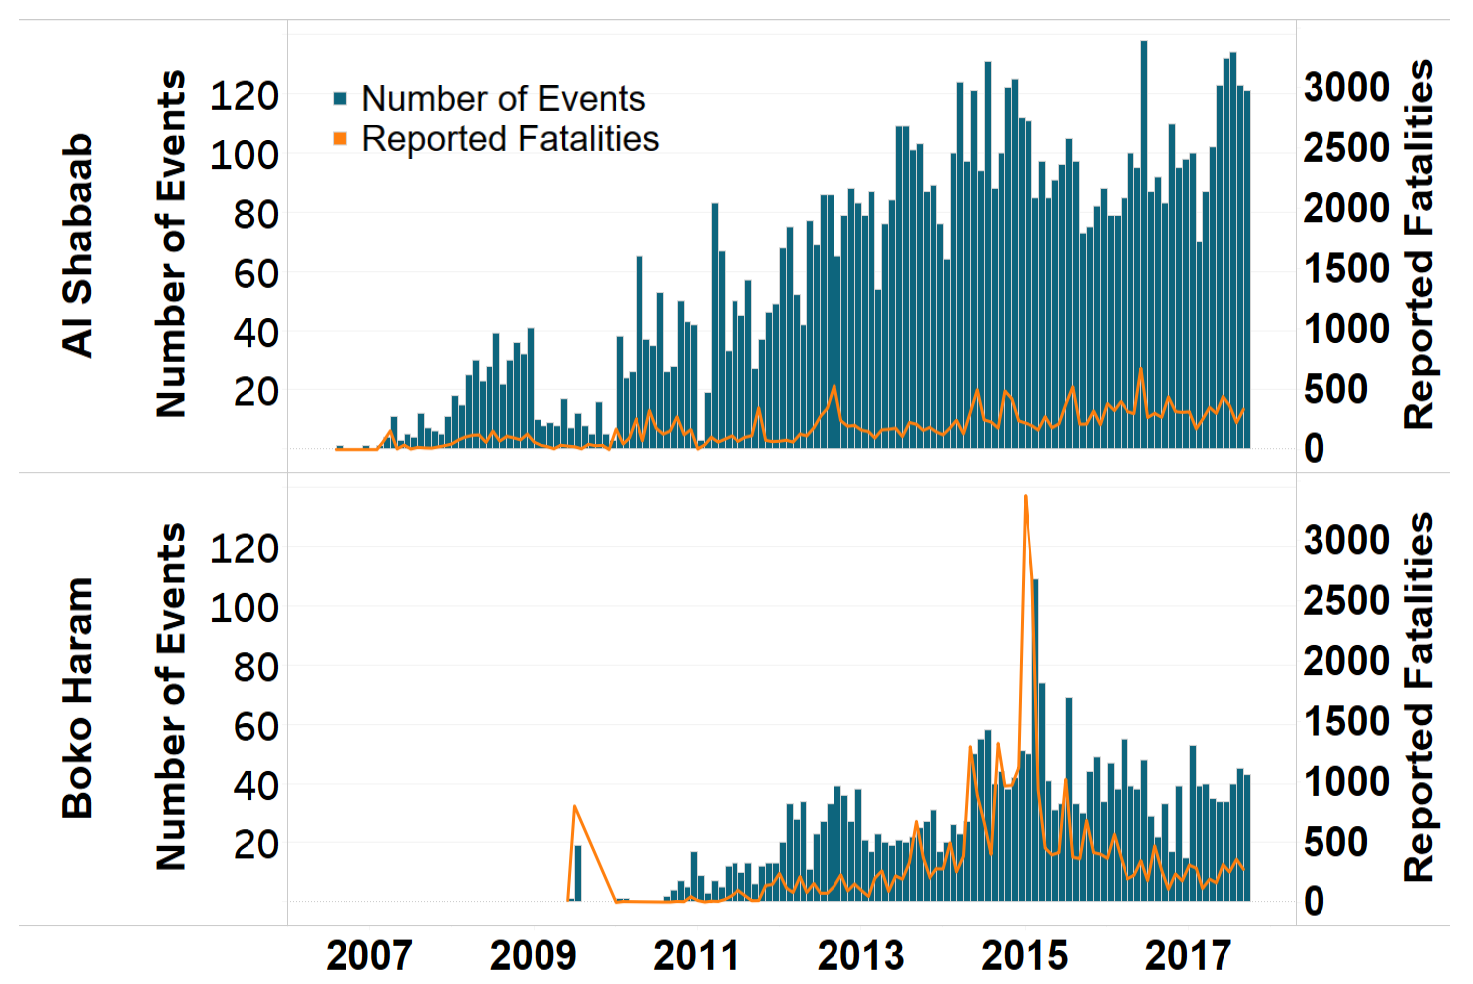 Figure 1: Al Shabaab and Boko Haram Conflict Activity, August 2006 - September 2017